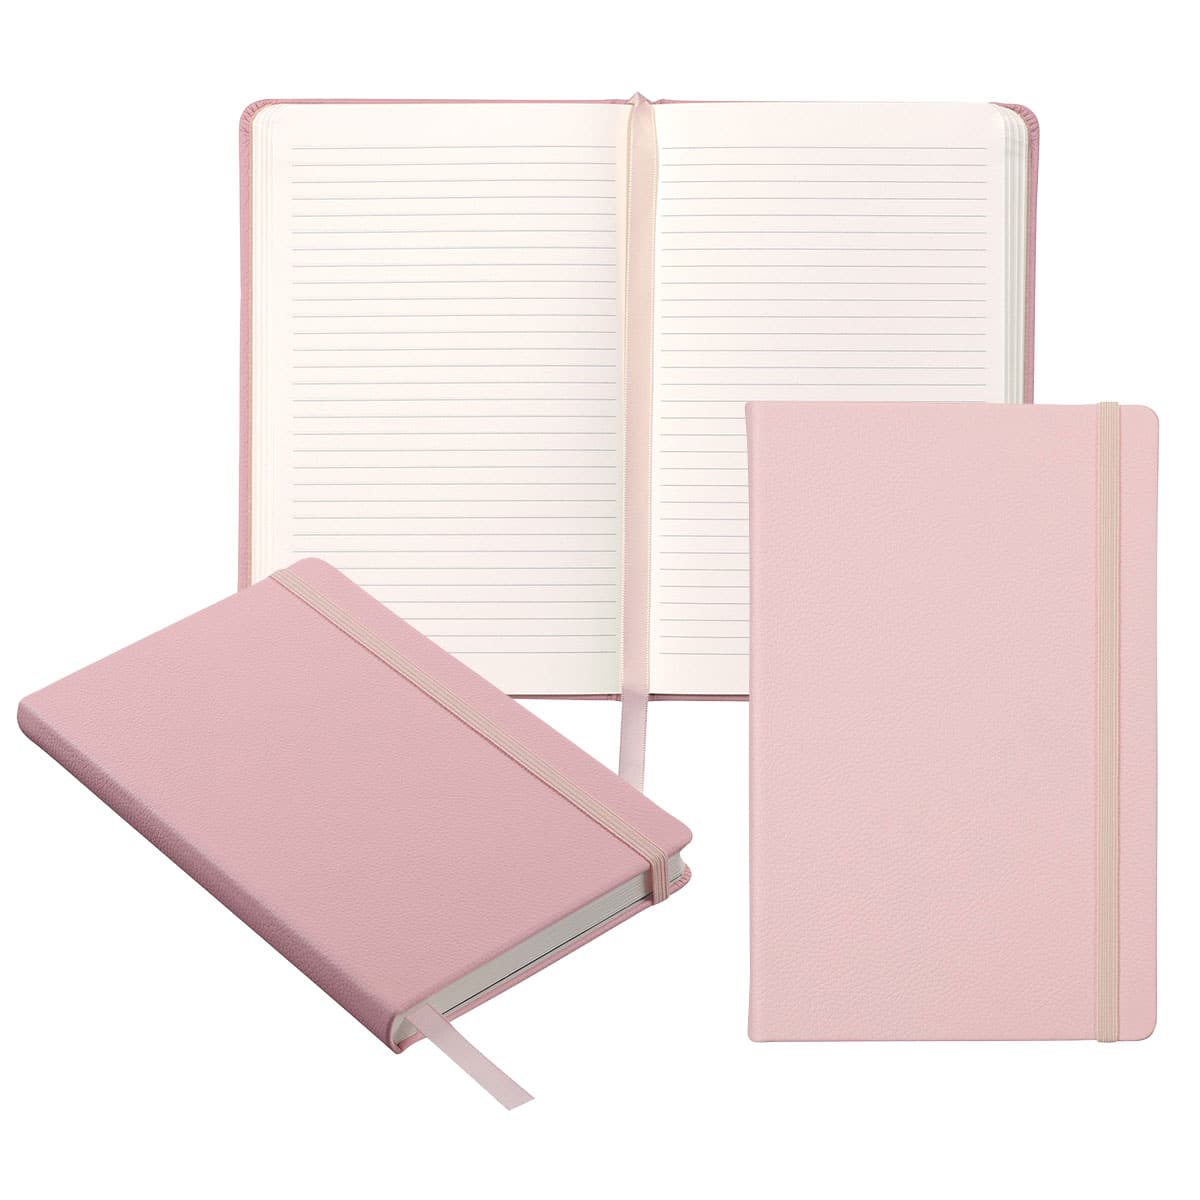 Three view collage of Quartz Pink notebook, open with ribbon marker, front view, and diagonal closed view of binding and lower edge of notebook